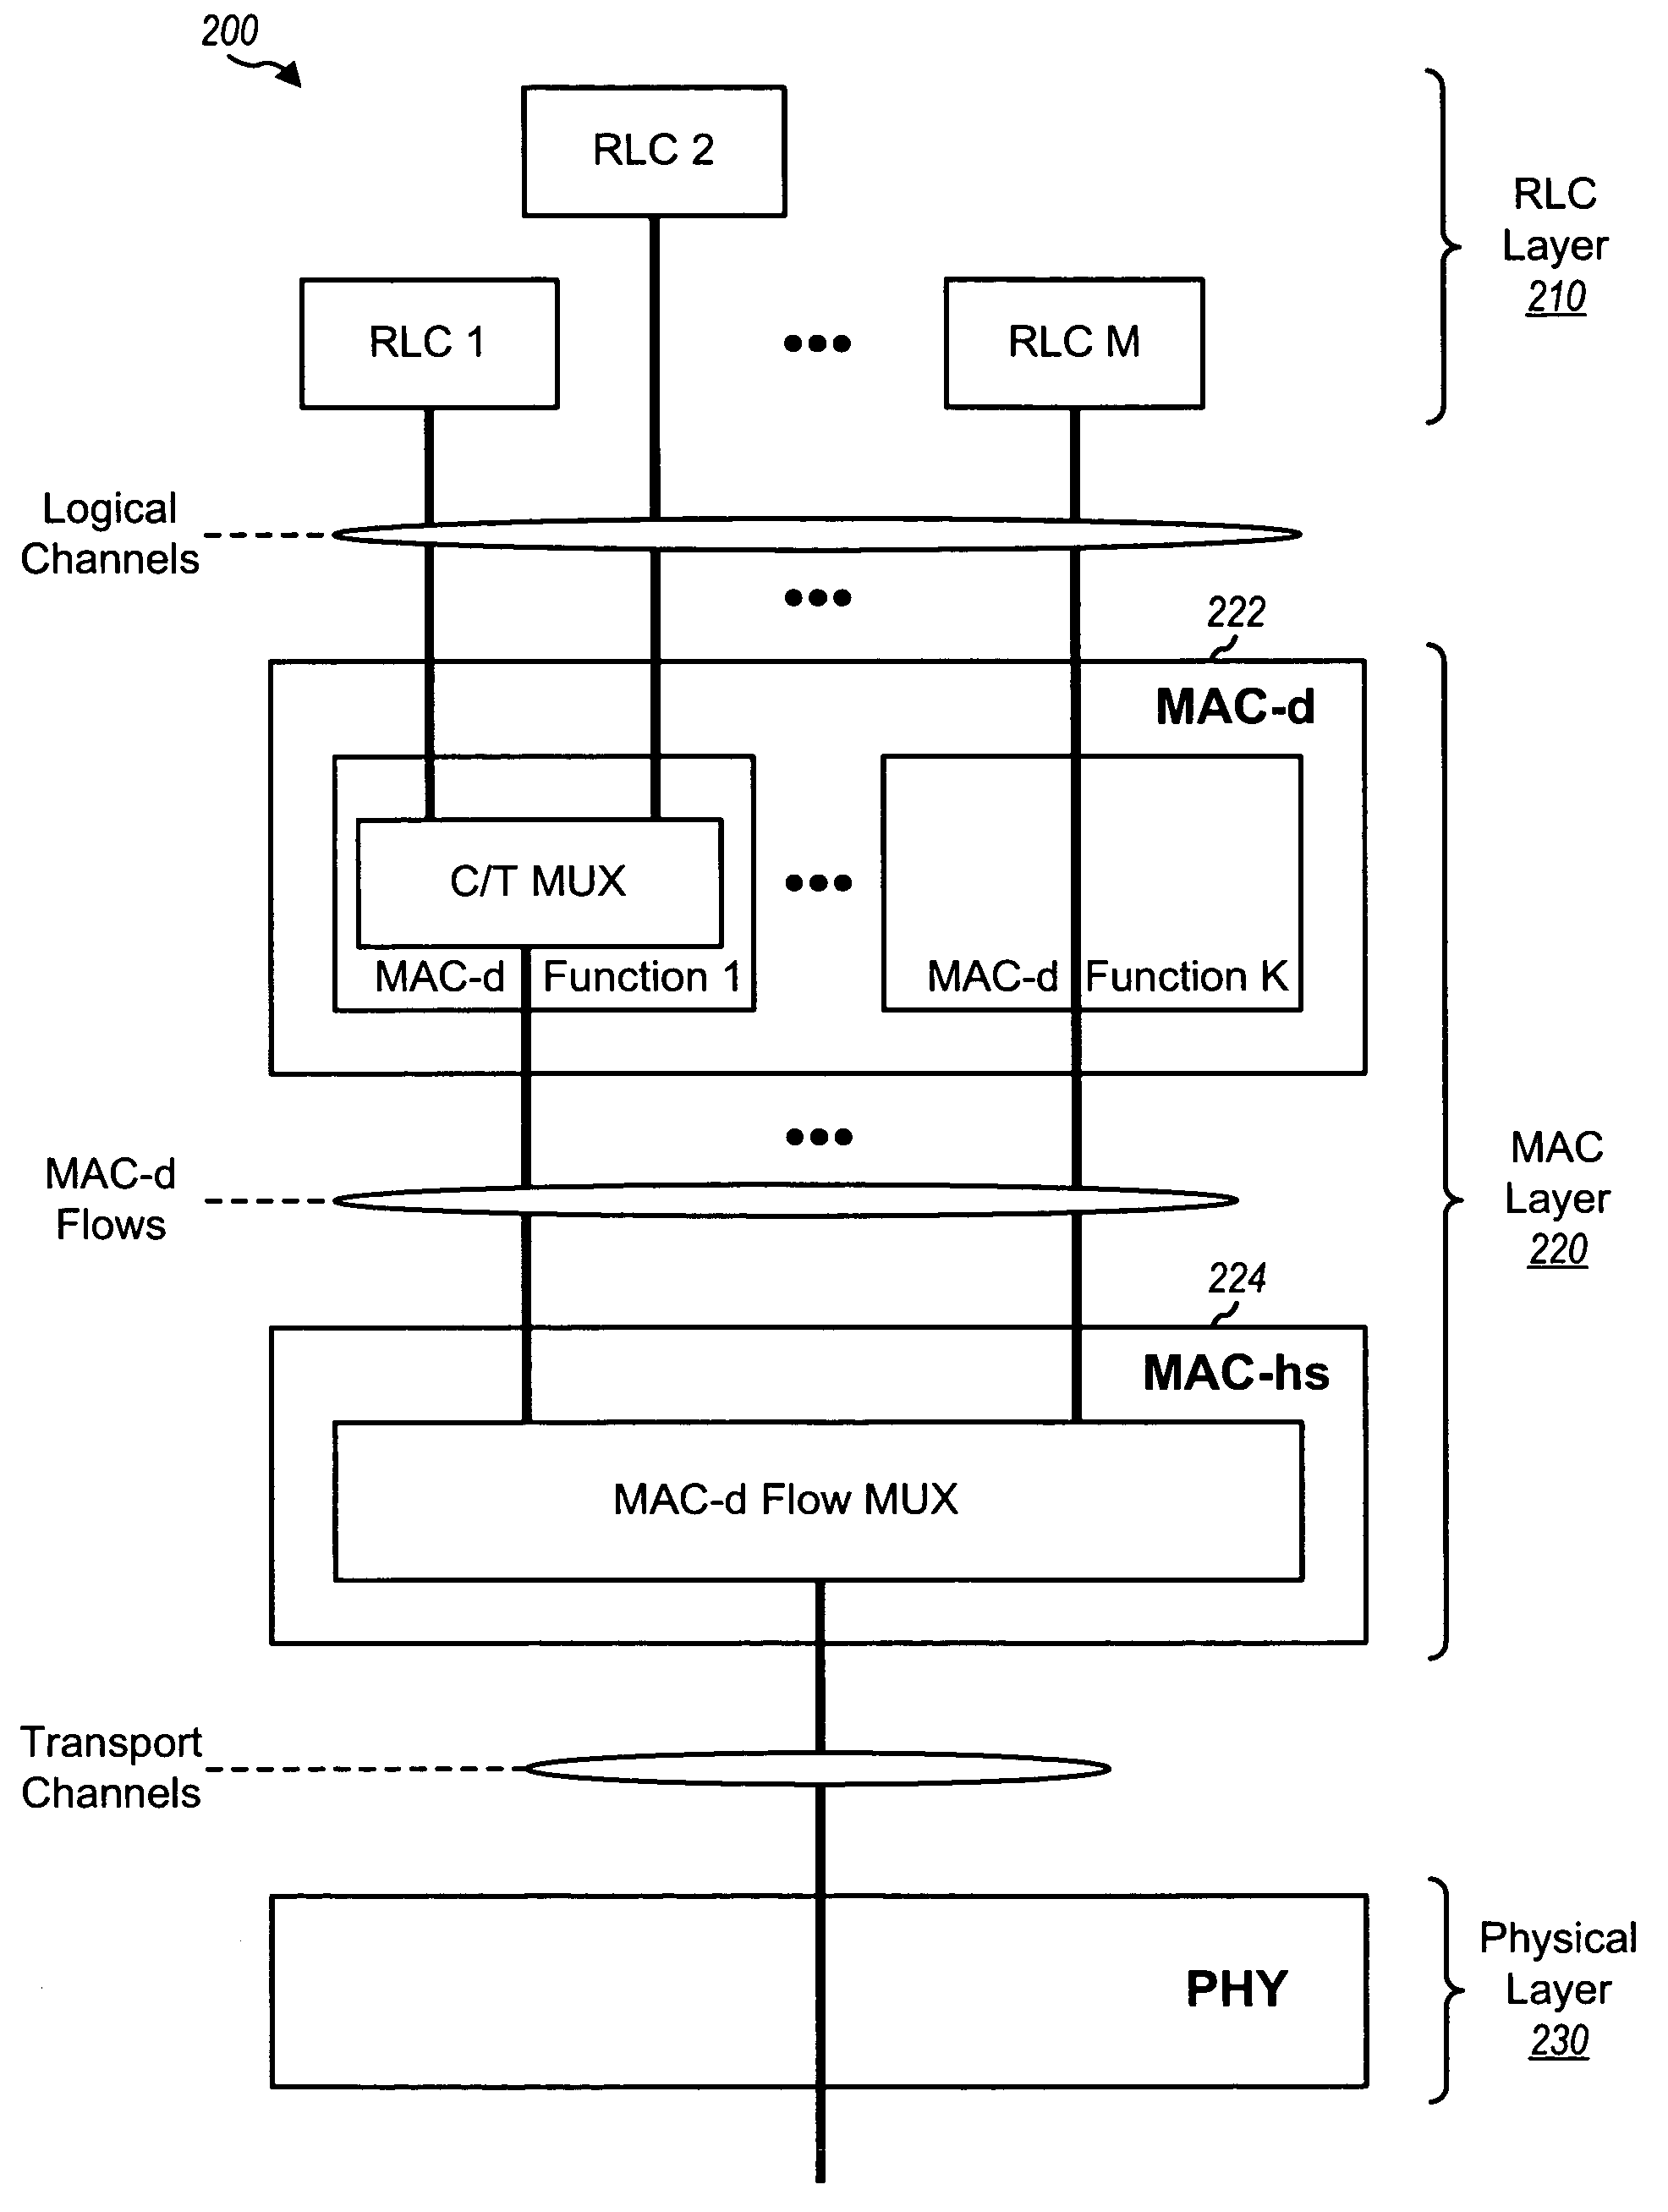 Data delivery in conjunction with a hybrid automatic retransmission mechanism in CDMA communication systems